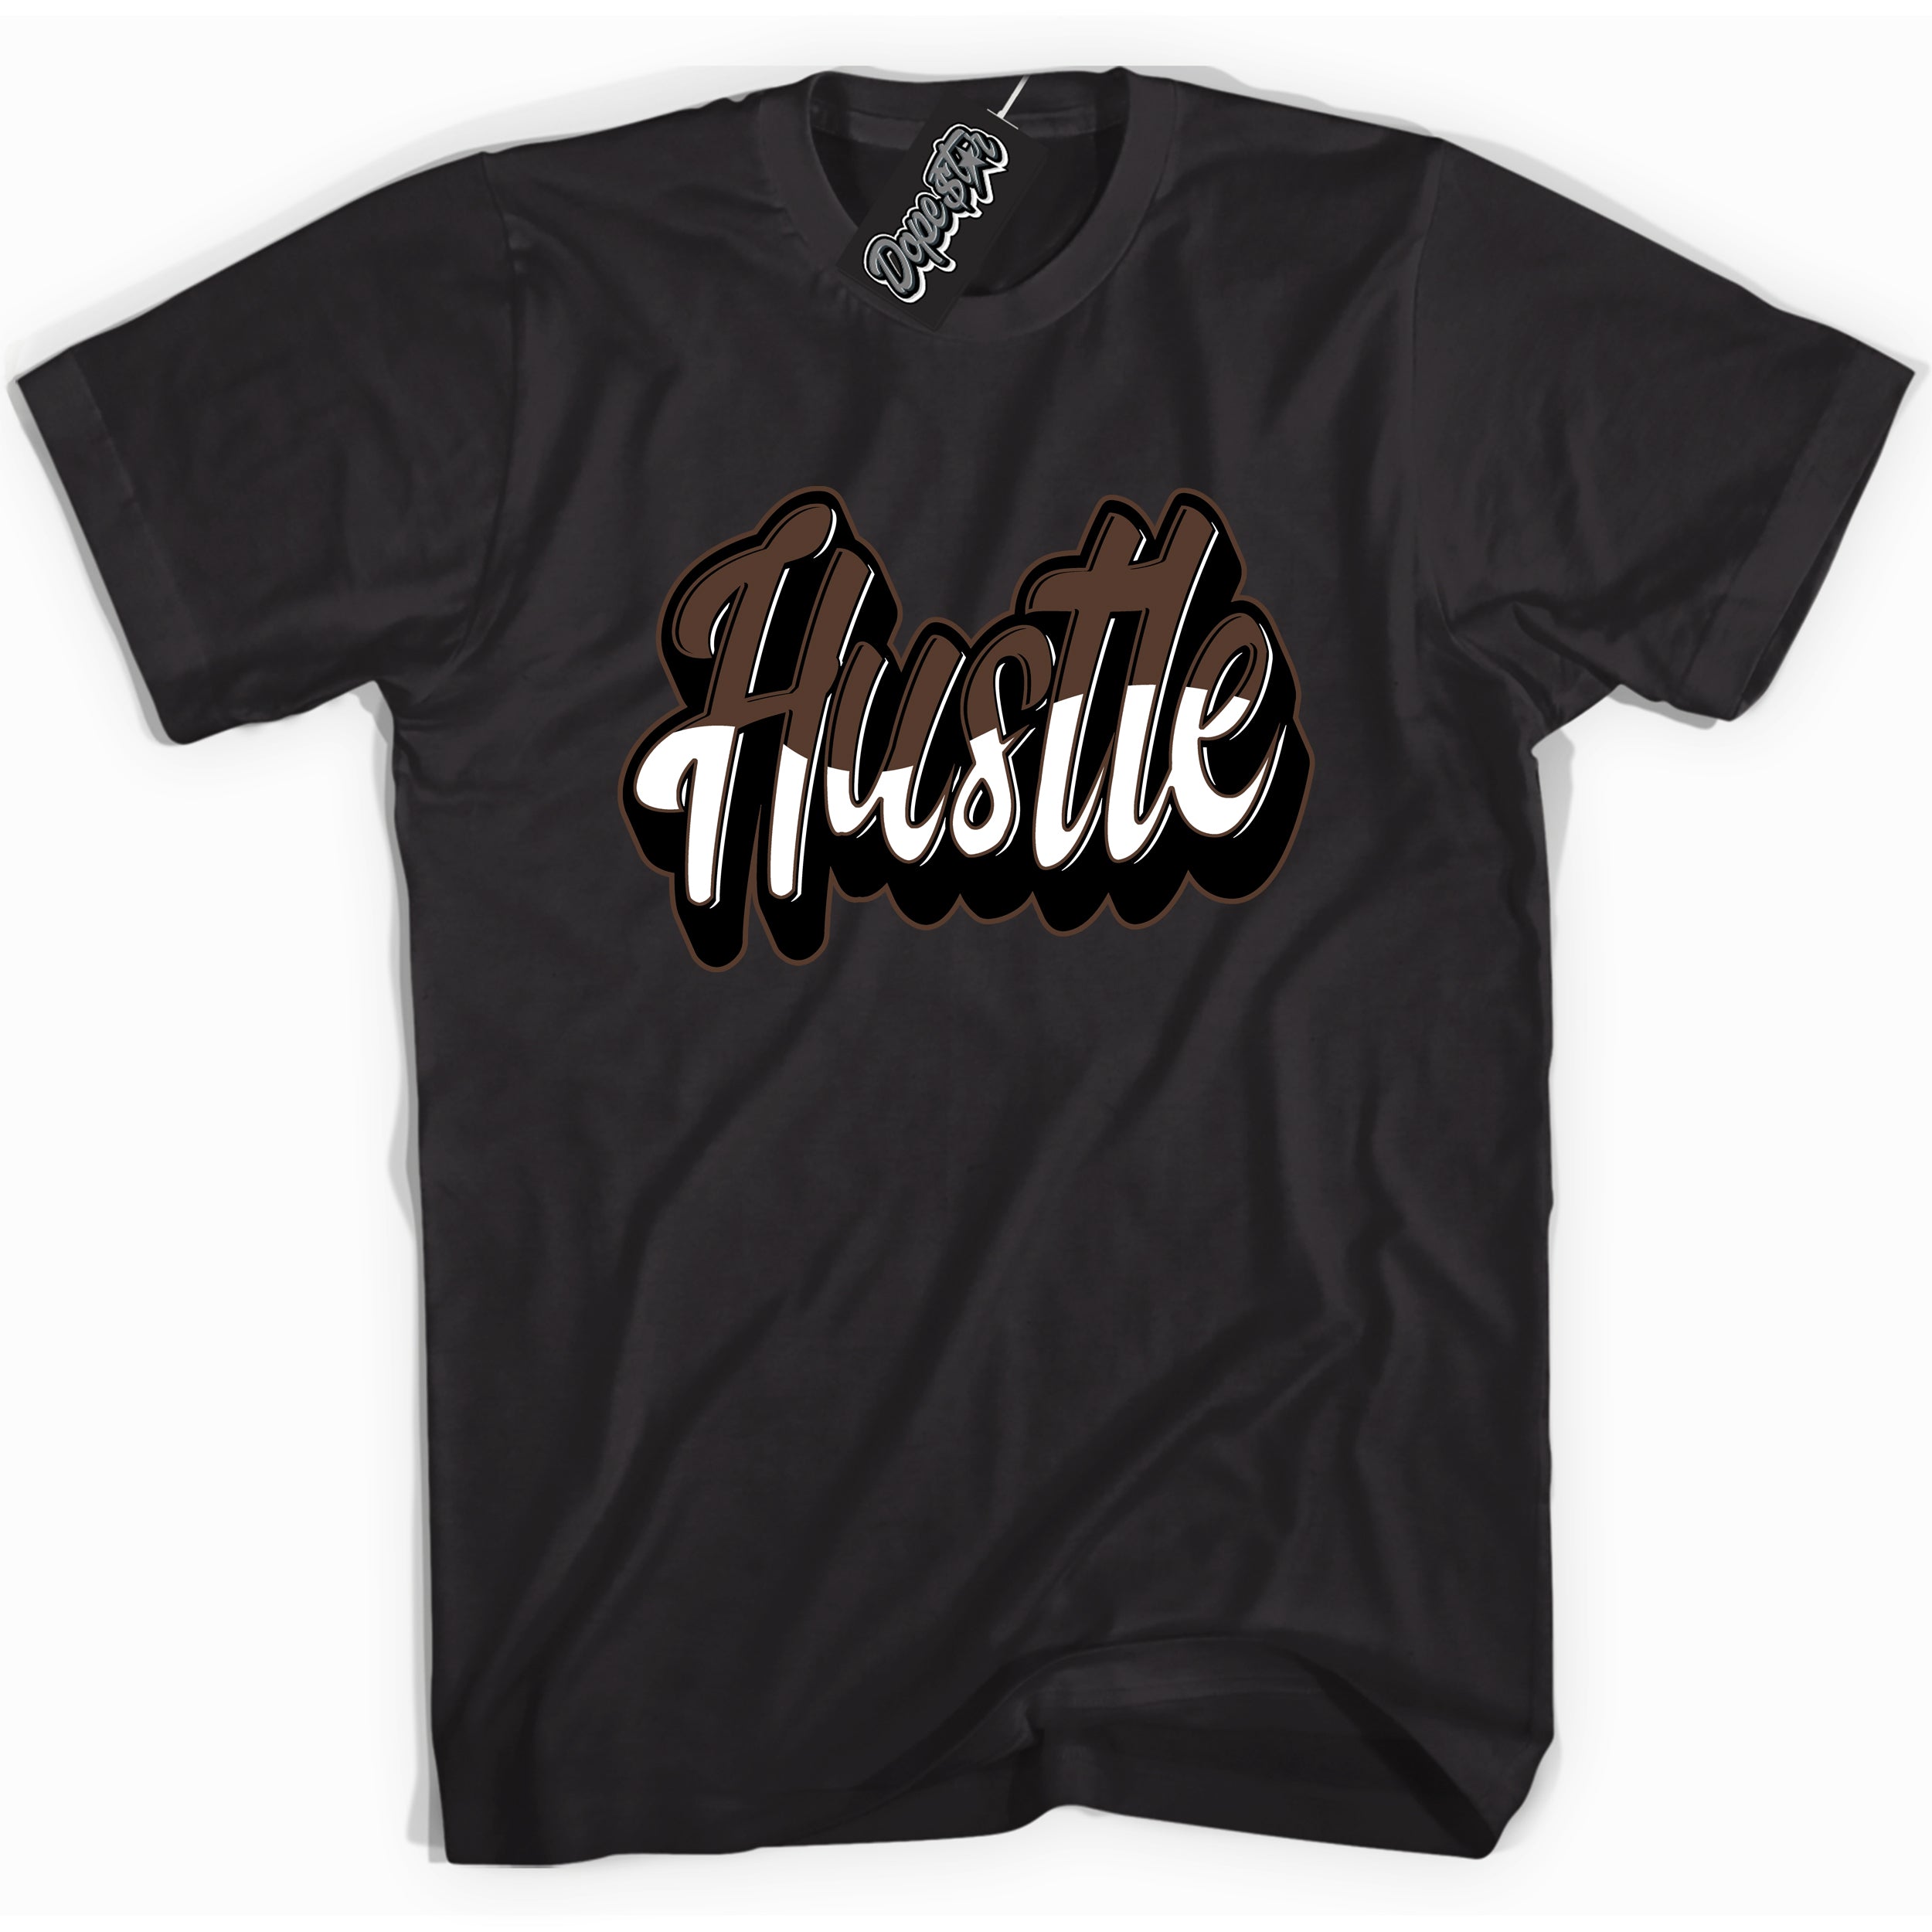 Cool Black graphic tee with “ Hustle ” design, that perfectly matches Palomino 1s sneakers 